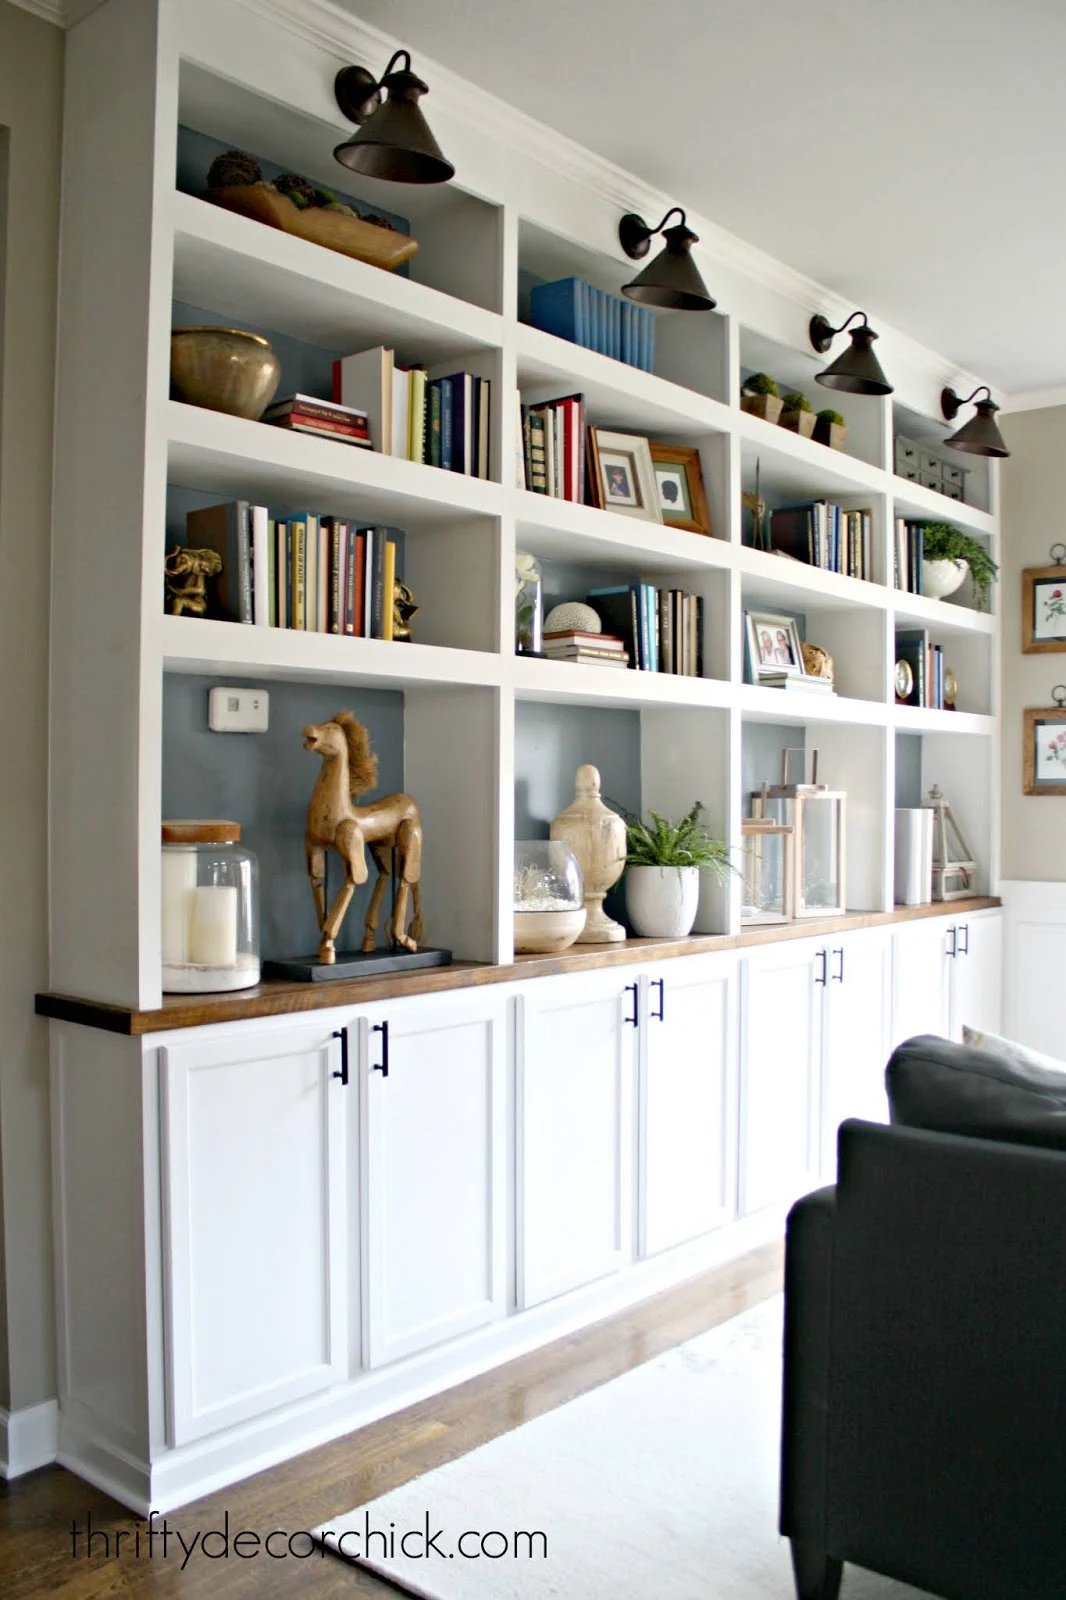 huge wall of DIY bookshelves with kitchen cabinets